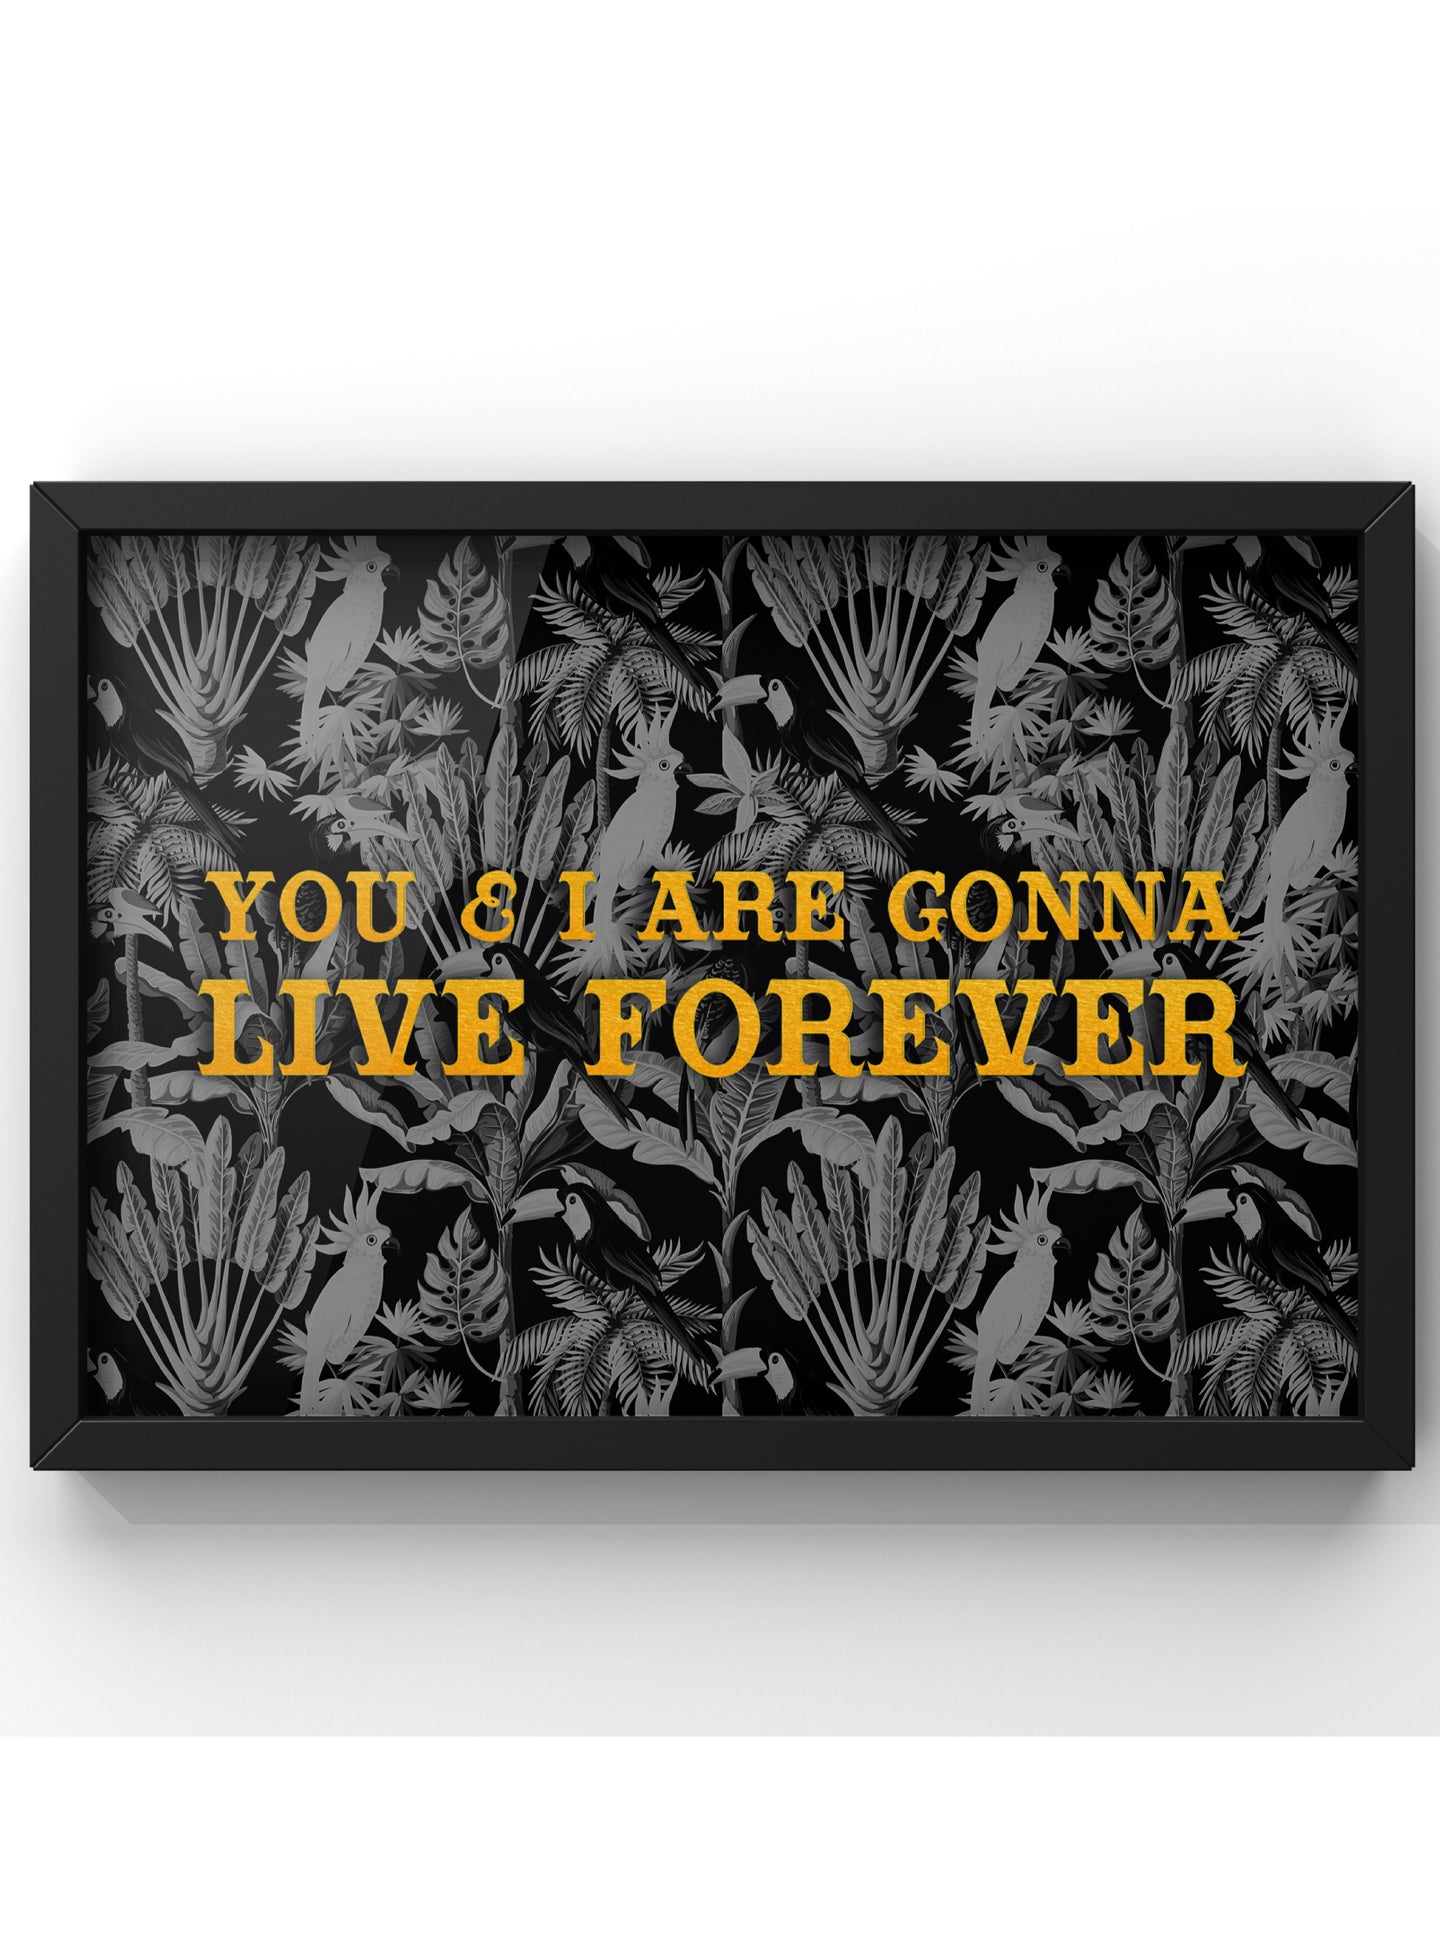 You & I are gonna live forever - Oasis Lyric Print